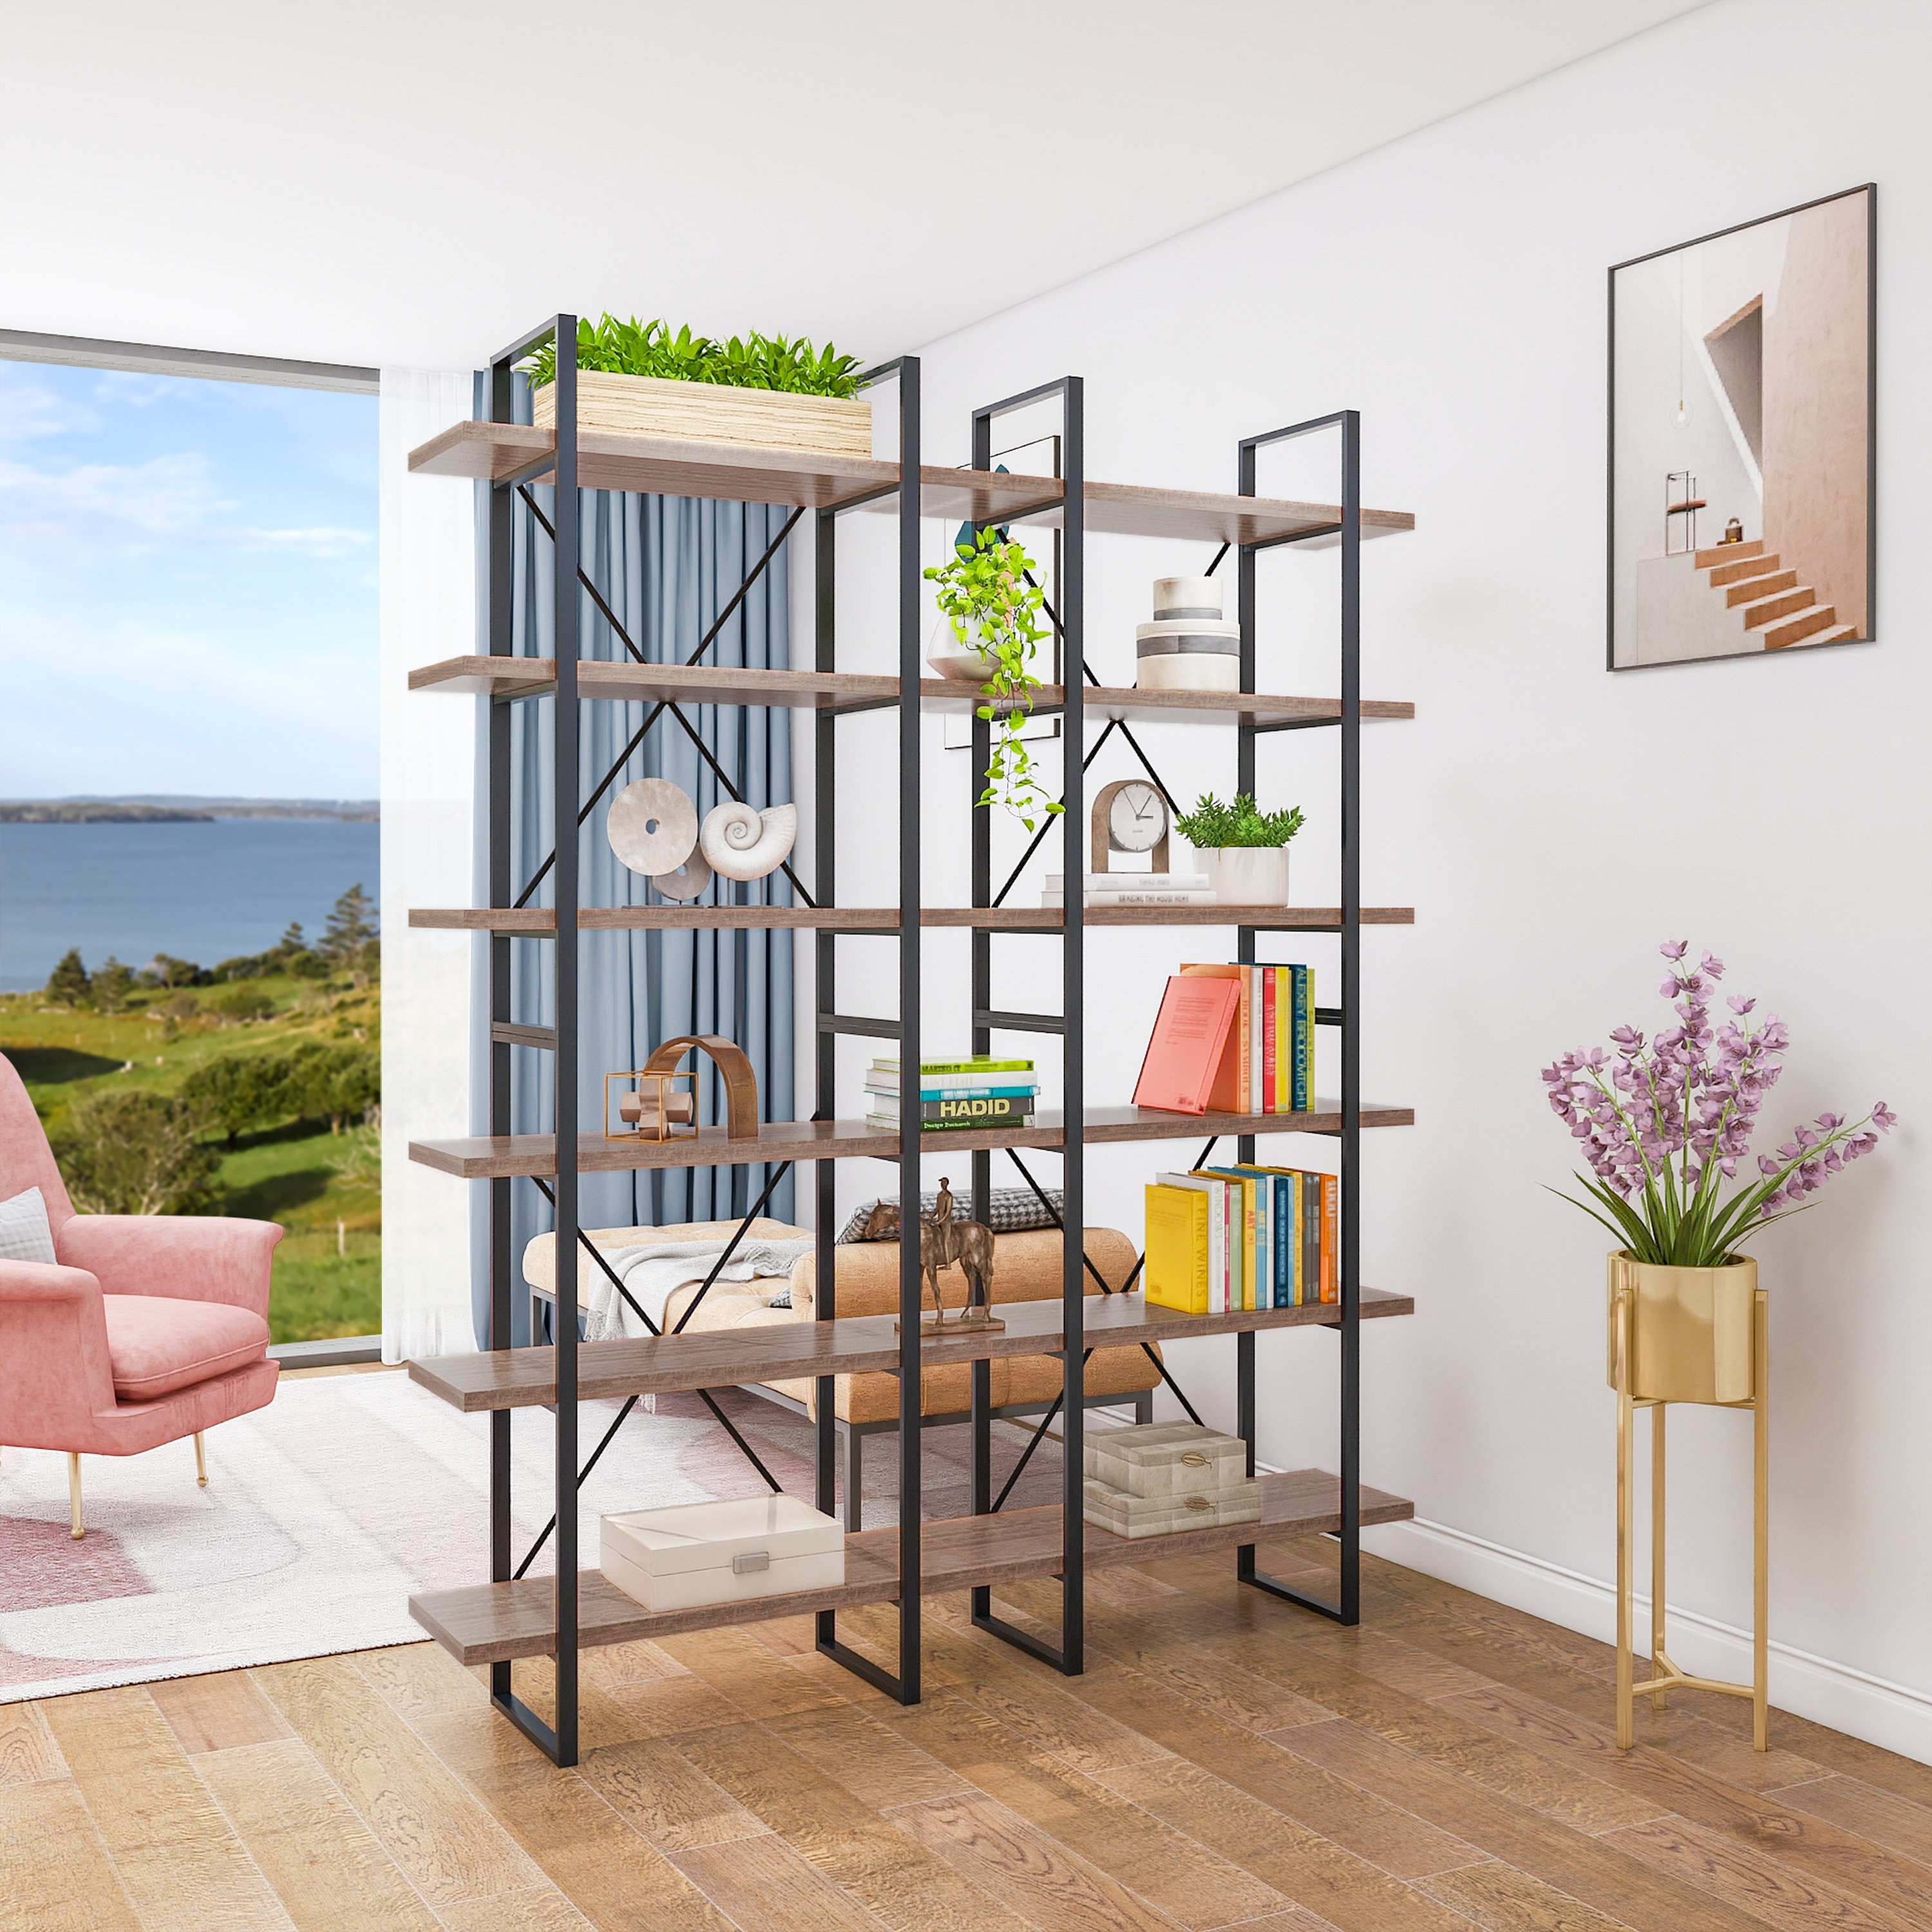 17 Stories 17 Stories Bookshelves And Bookcases 6-shelf Etagere